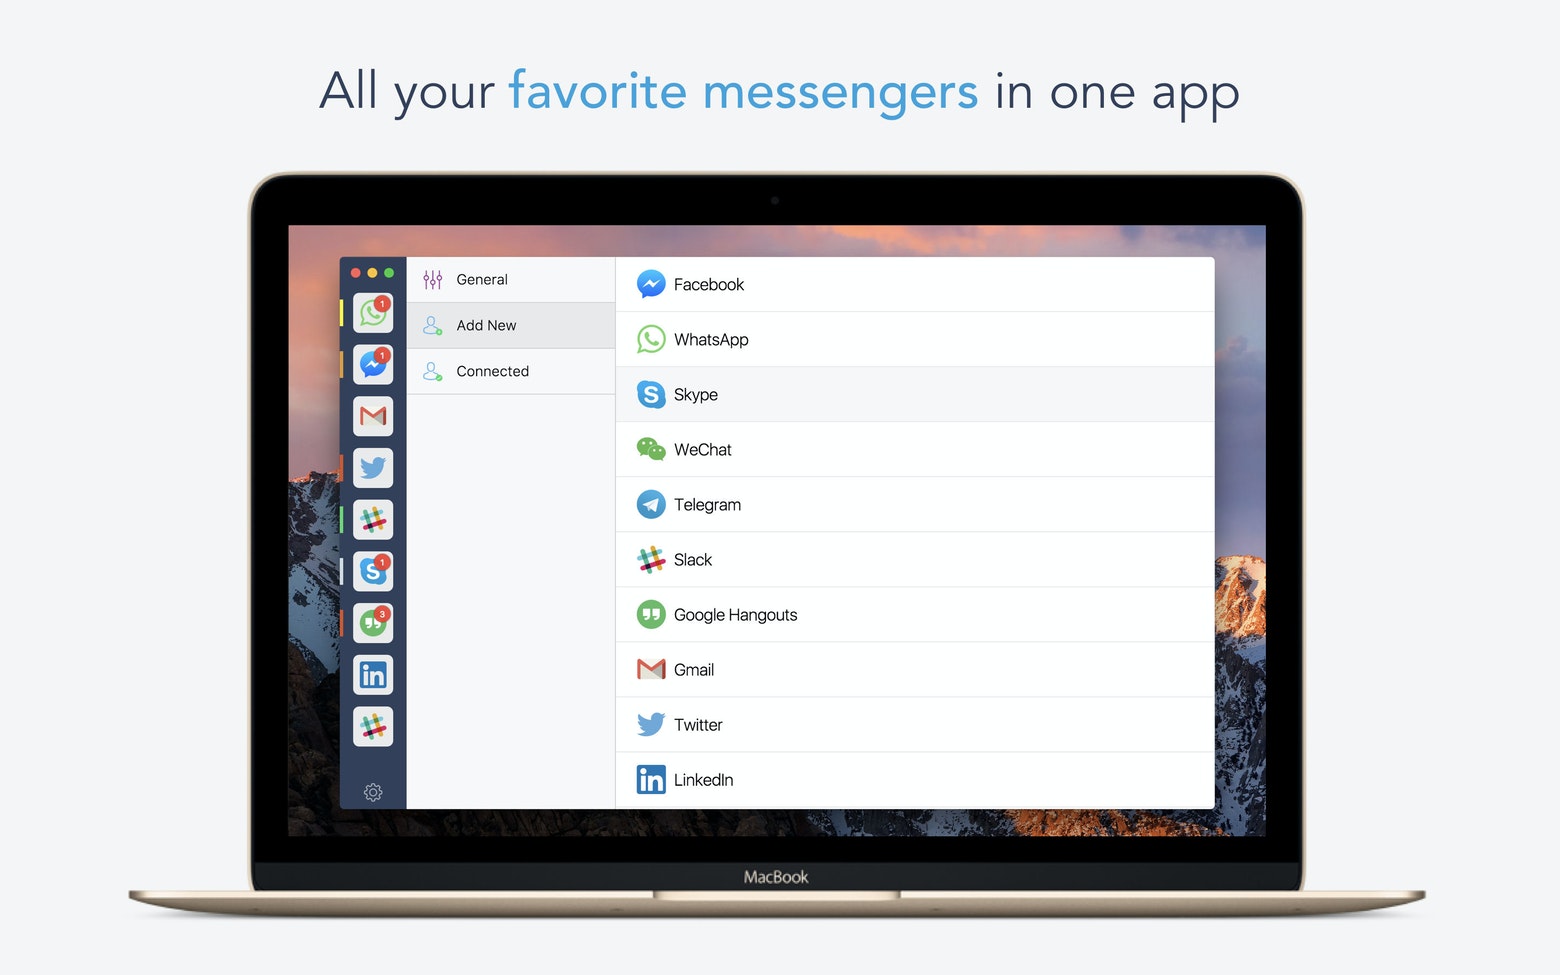 does free chat for facebook have a mac os x launch daemon